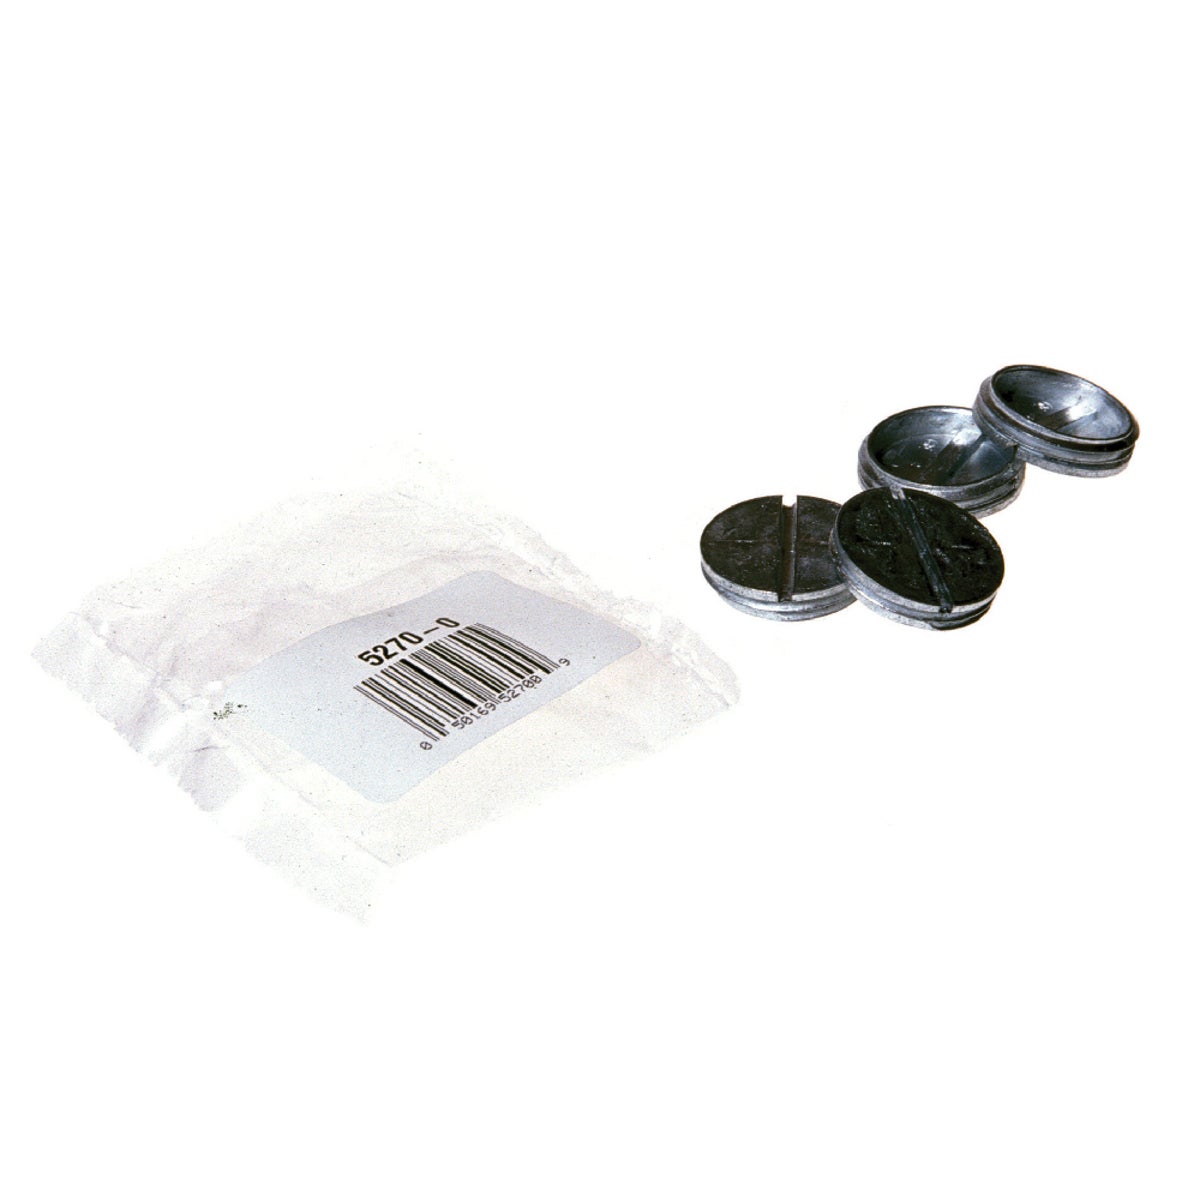 Item 537500, For threaded outlets, 3/4", 4 per poly bag.